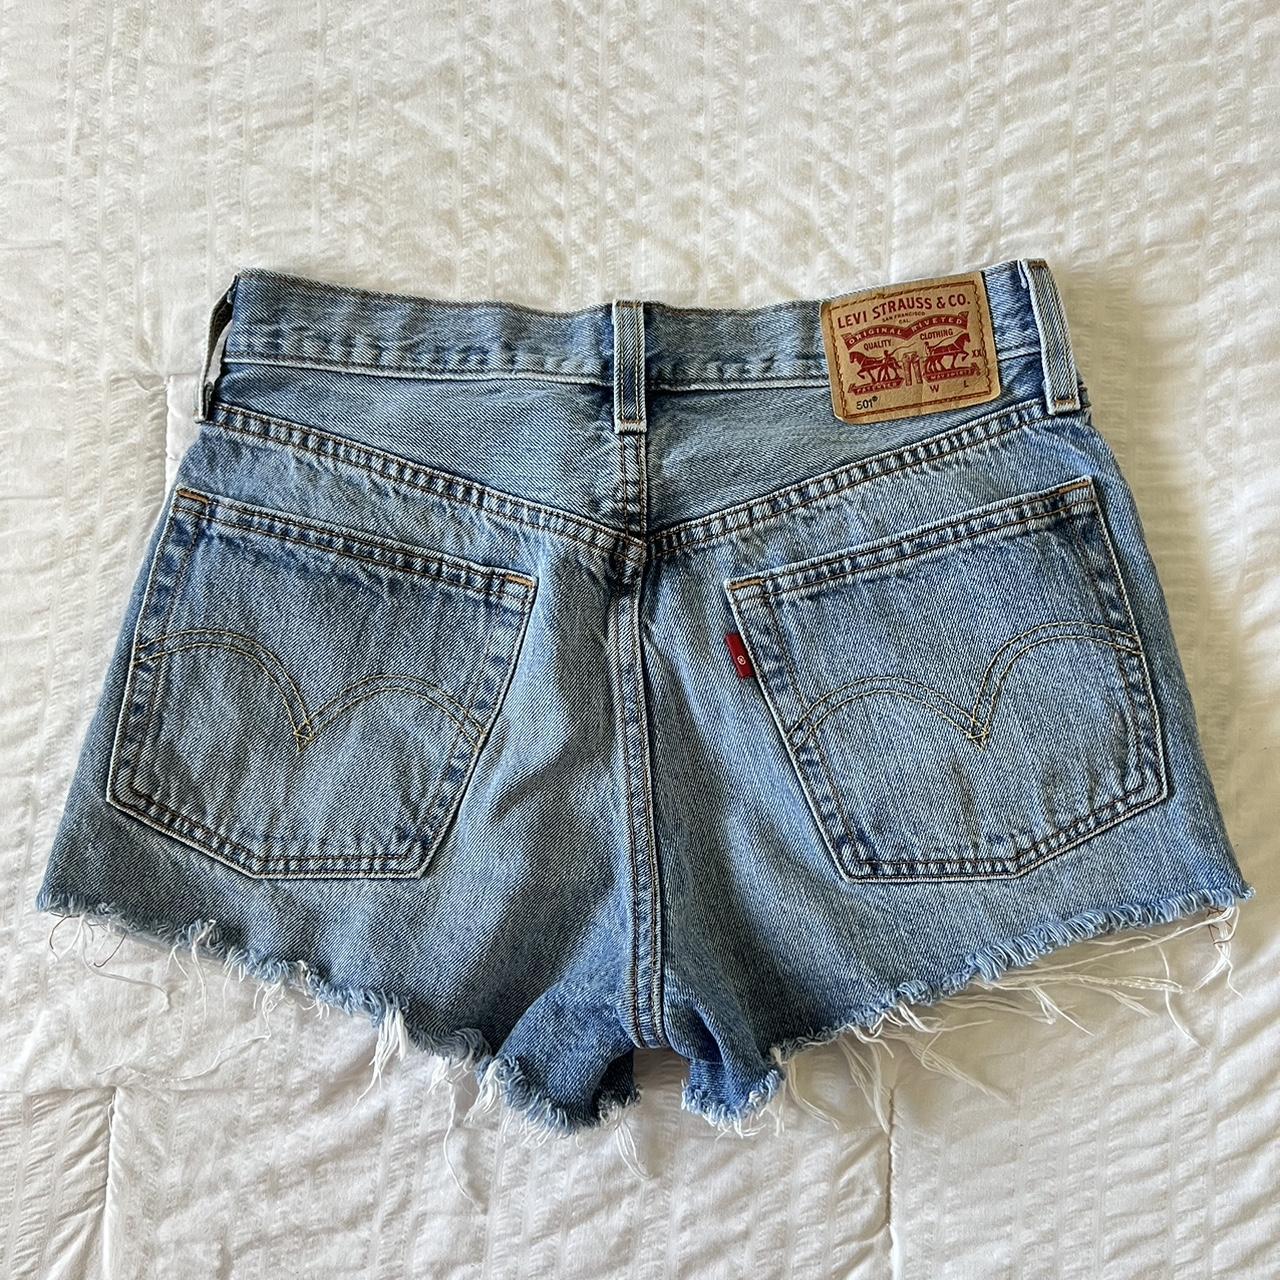 Levi’s 501 shorts - labeled size 26 - in perfect... - Depop